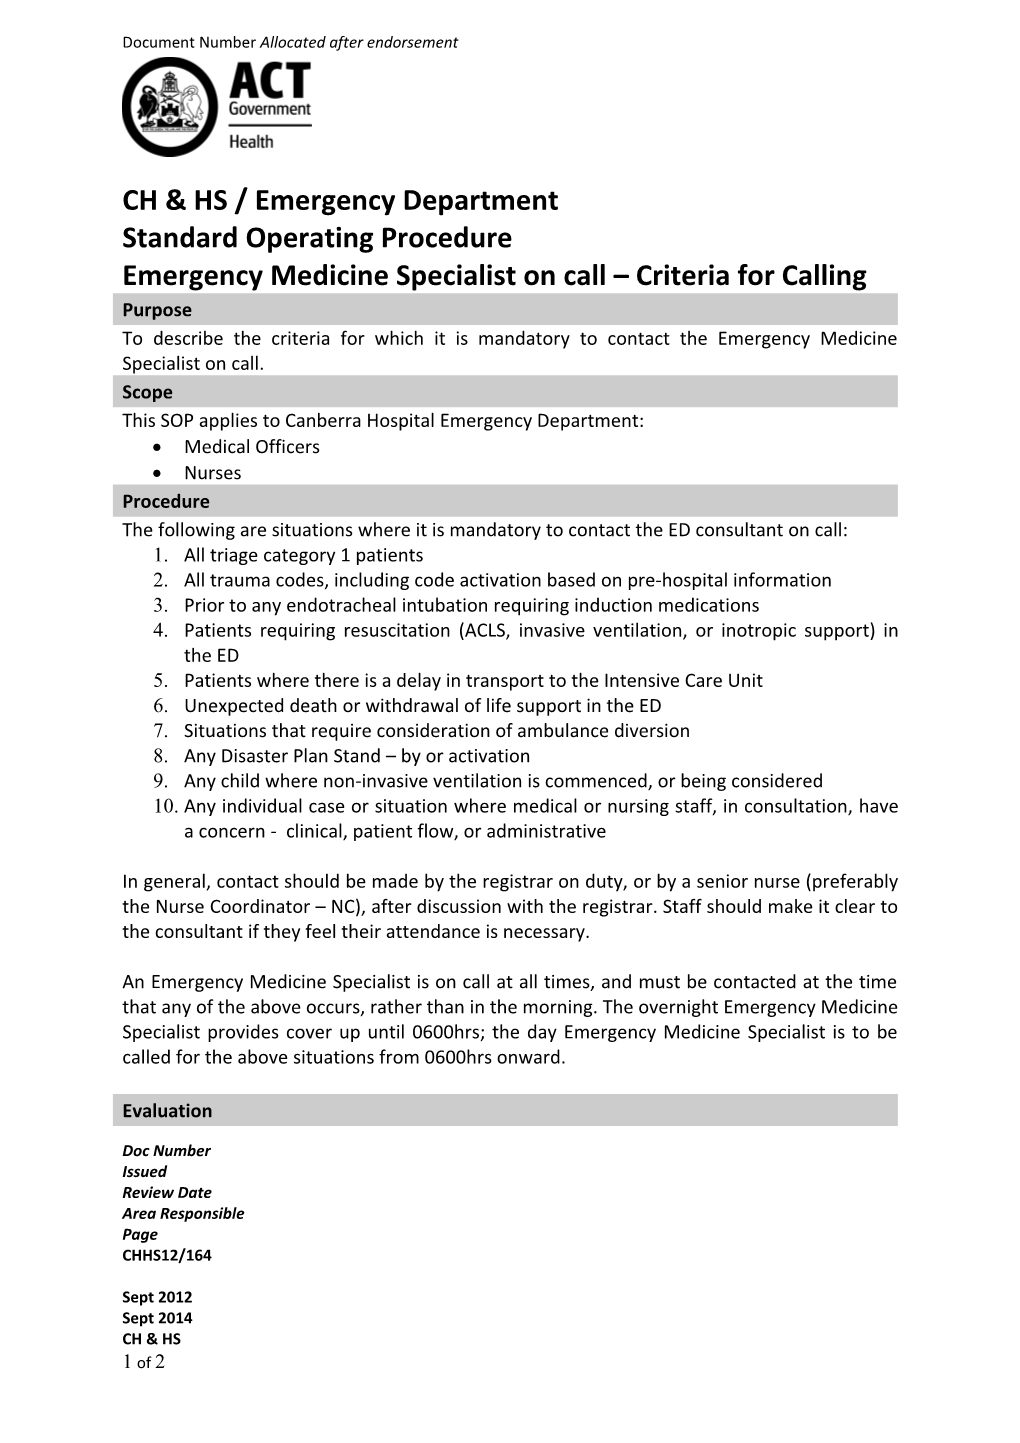 Emergency Medicine Specialist on Call - Criteria for Calling